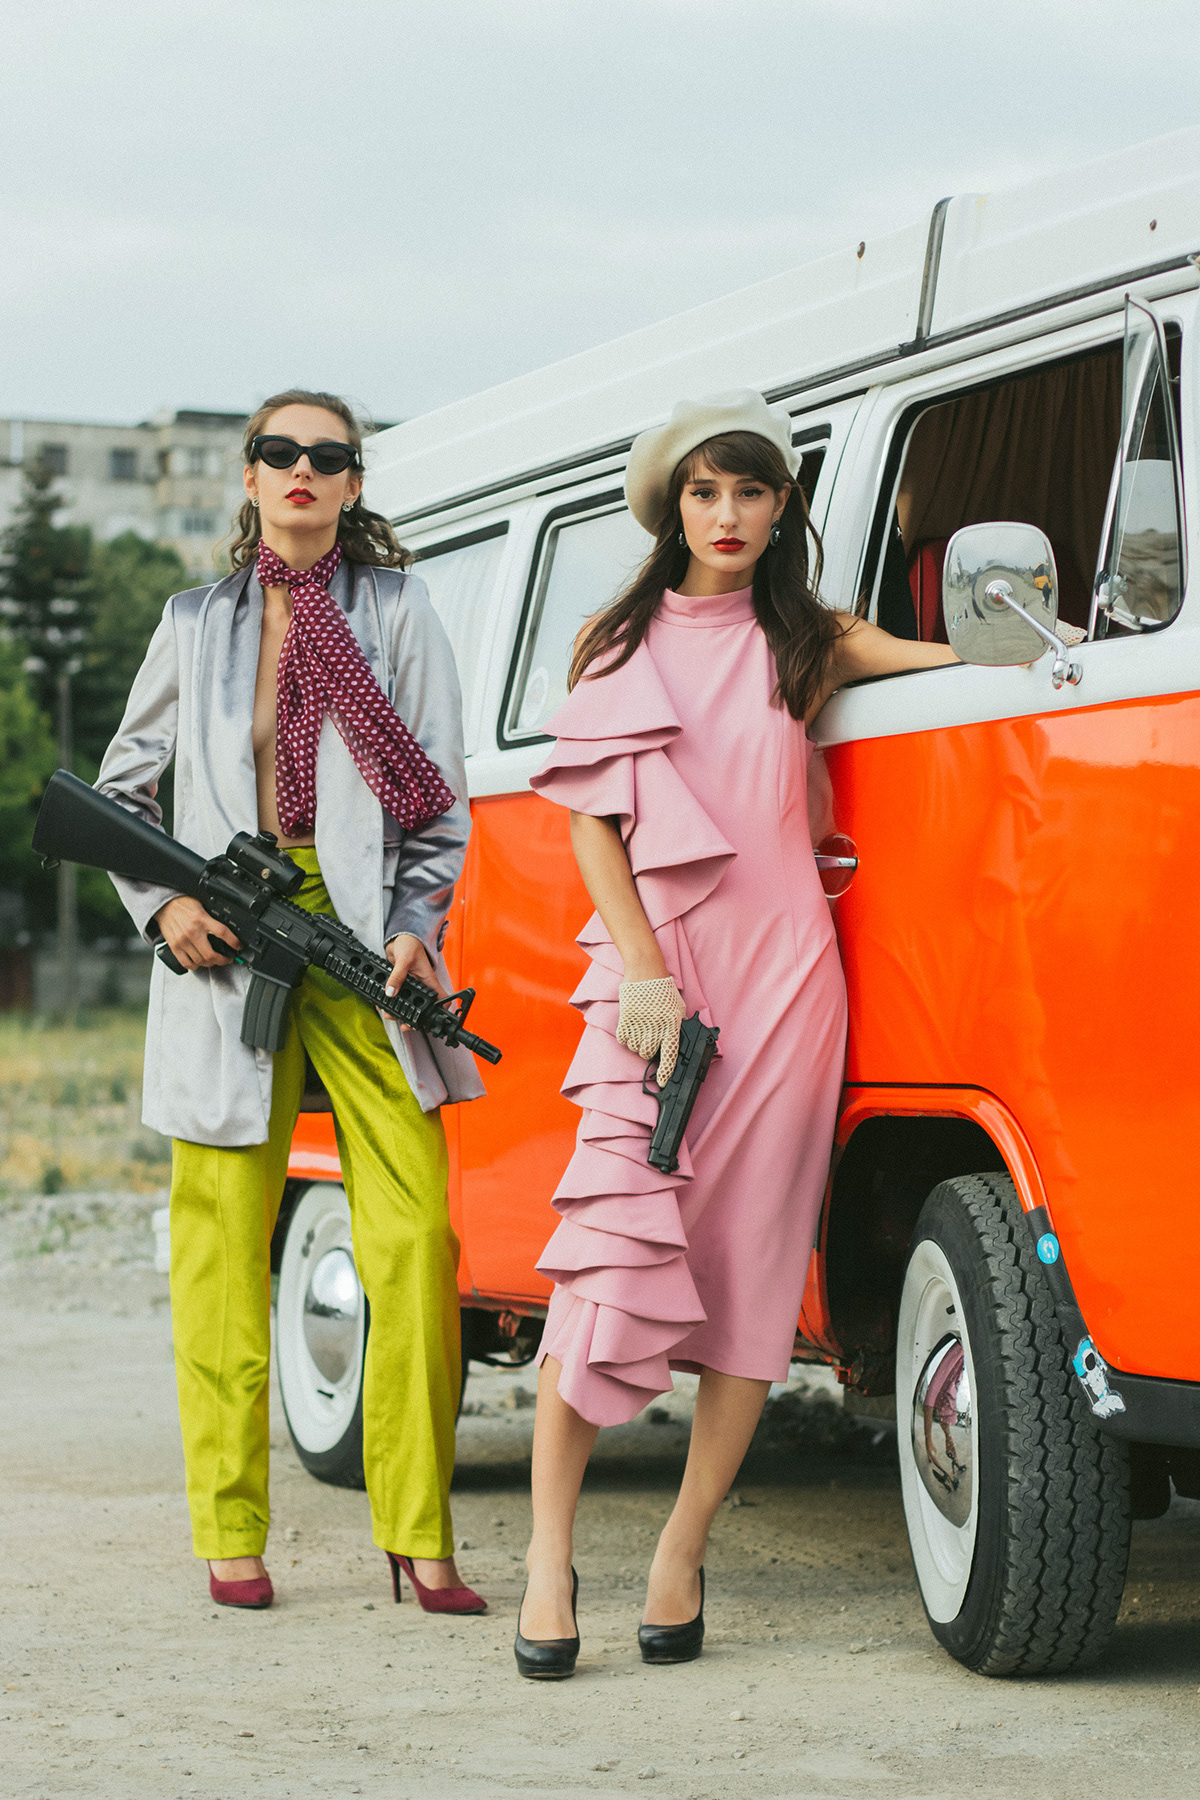 bonnie and clyde charlie's angels Vintage clothing hippie minivan 70's fashion Classy Outfits disco mood girls and guns machineguns Glitter